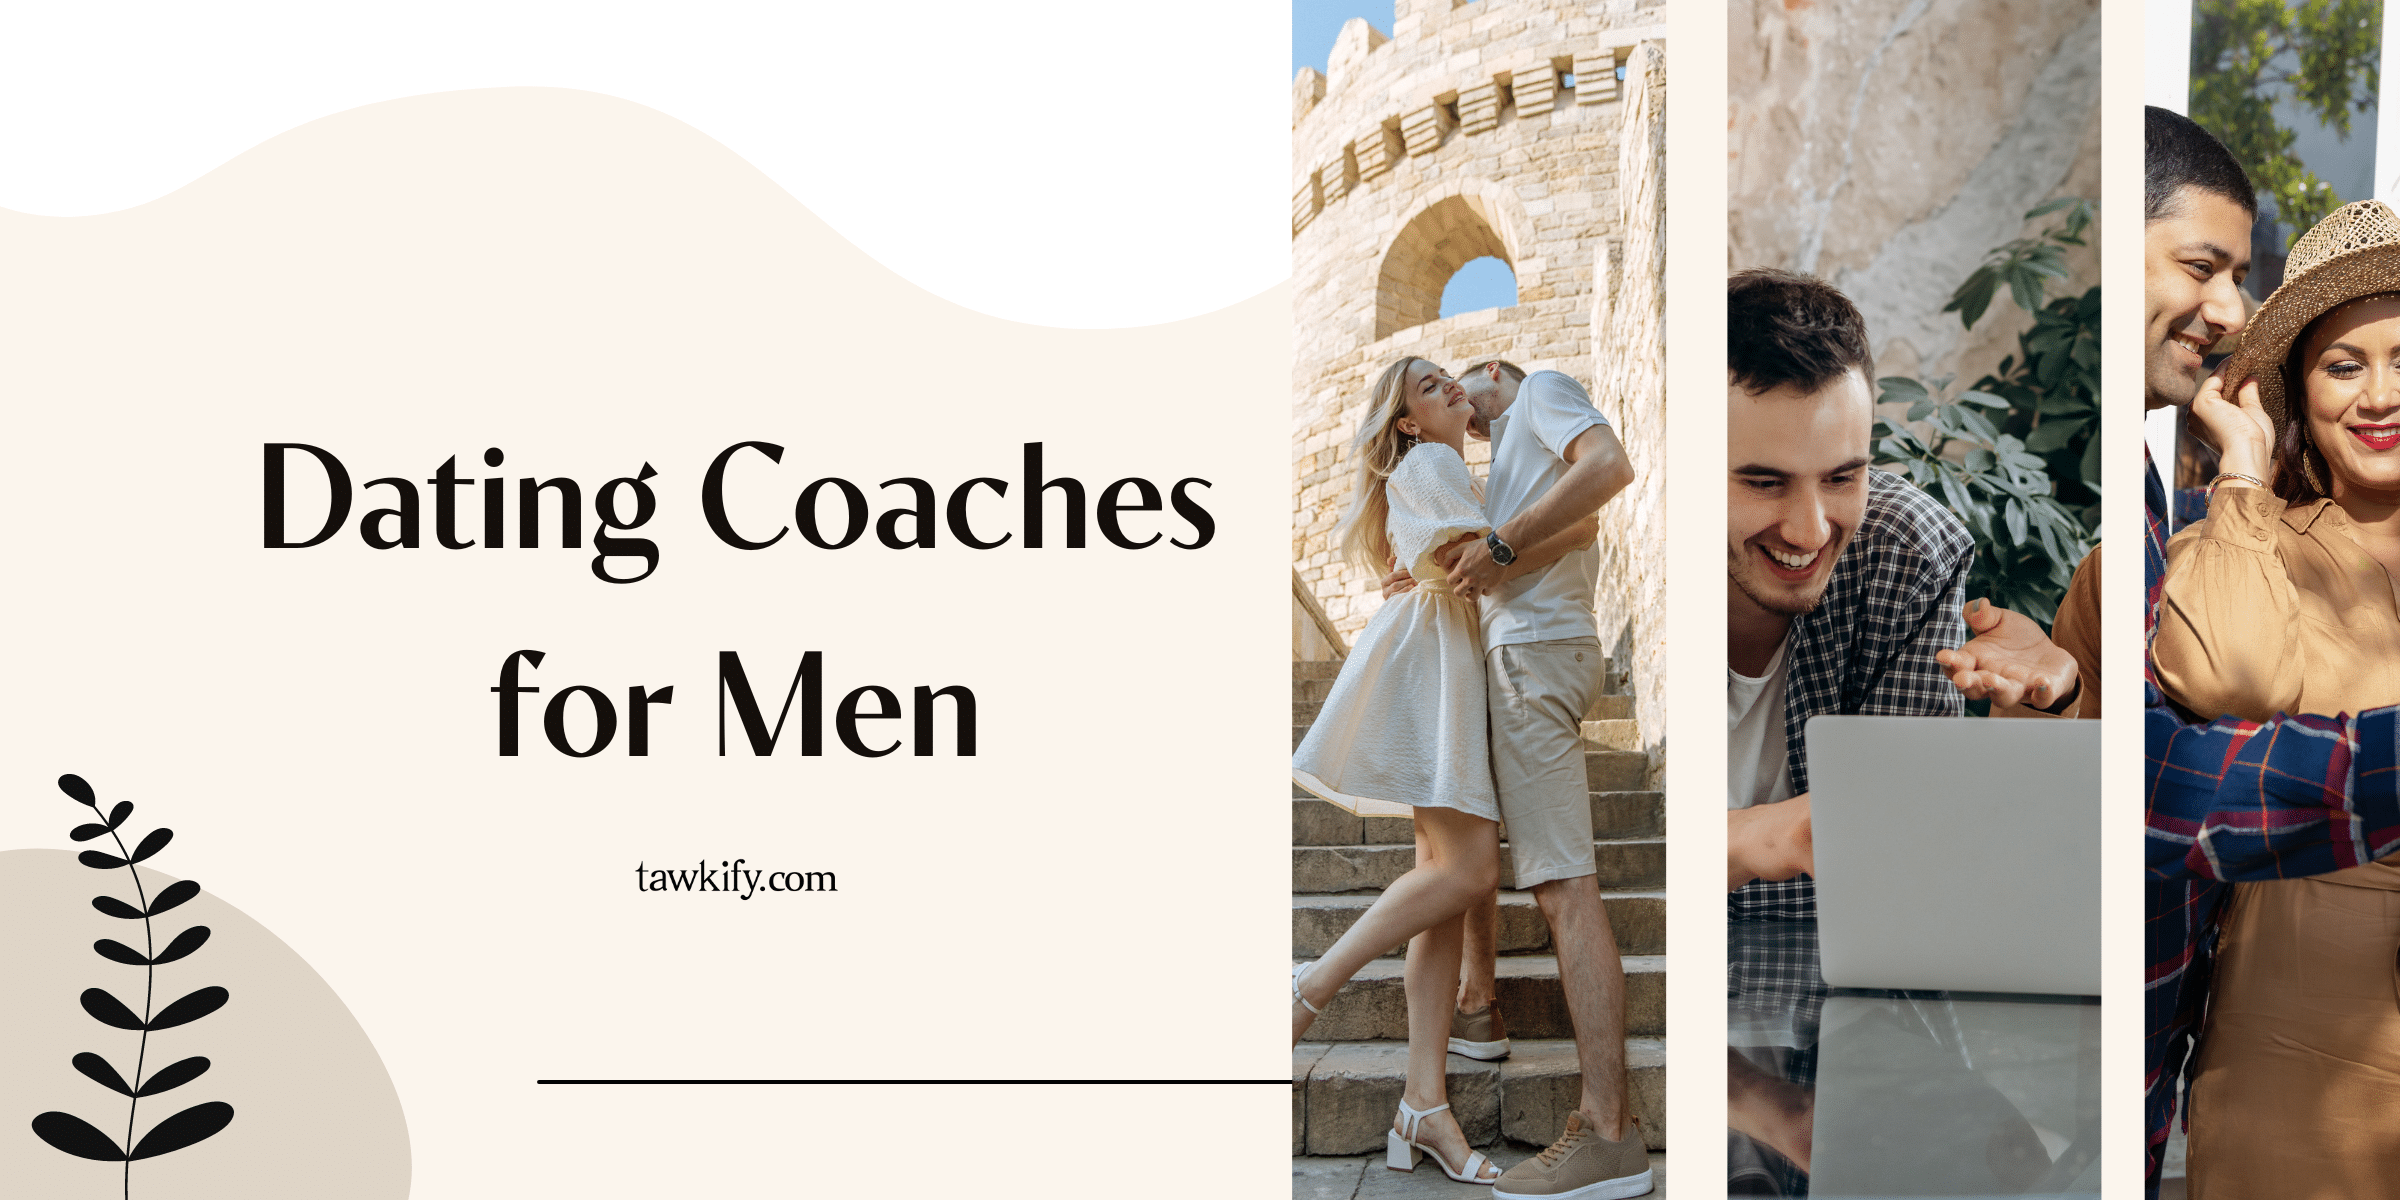 Tools men can use to find love in 2024. Dating coaches for men help boost confidence, clarity, and relationship success.